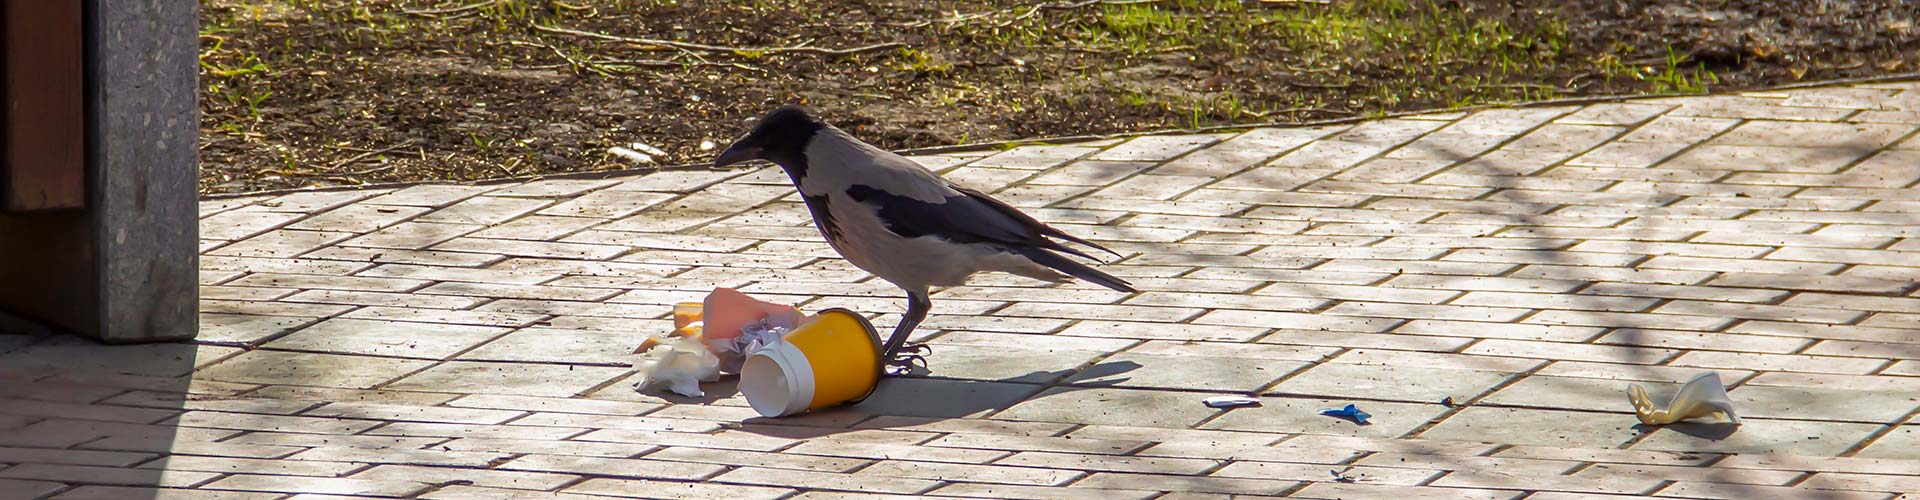 A bird standing on a broken cup in a yard protected by ELEET